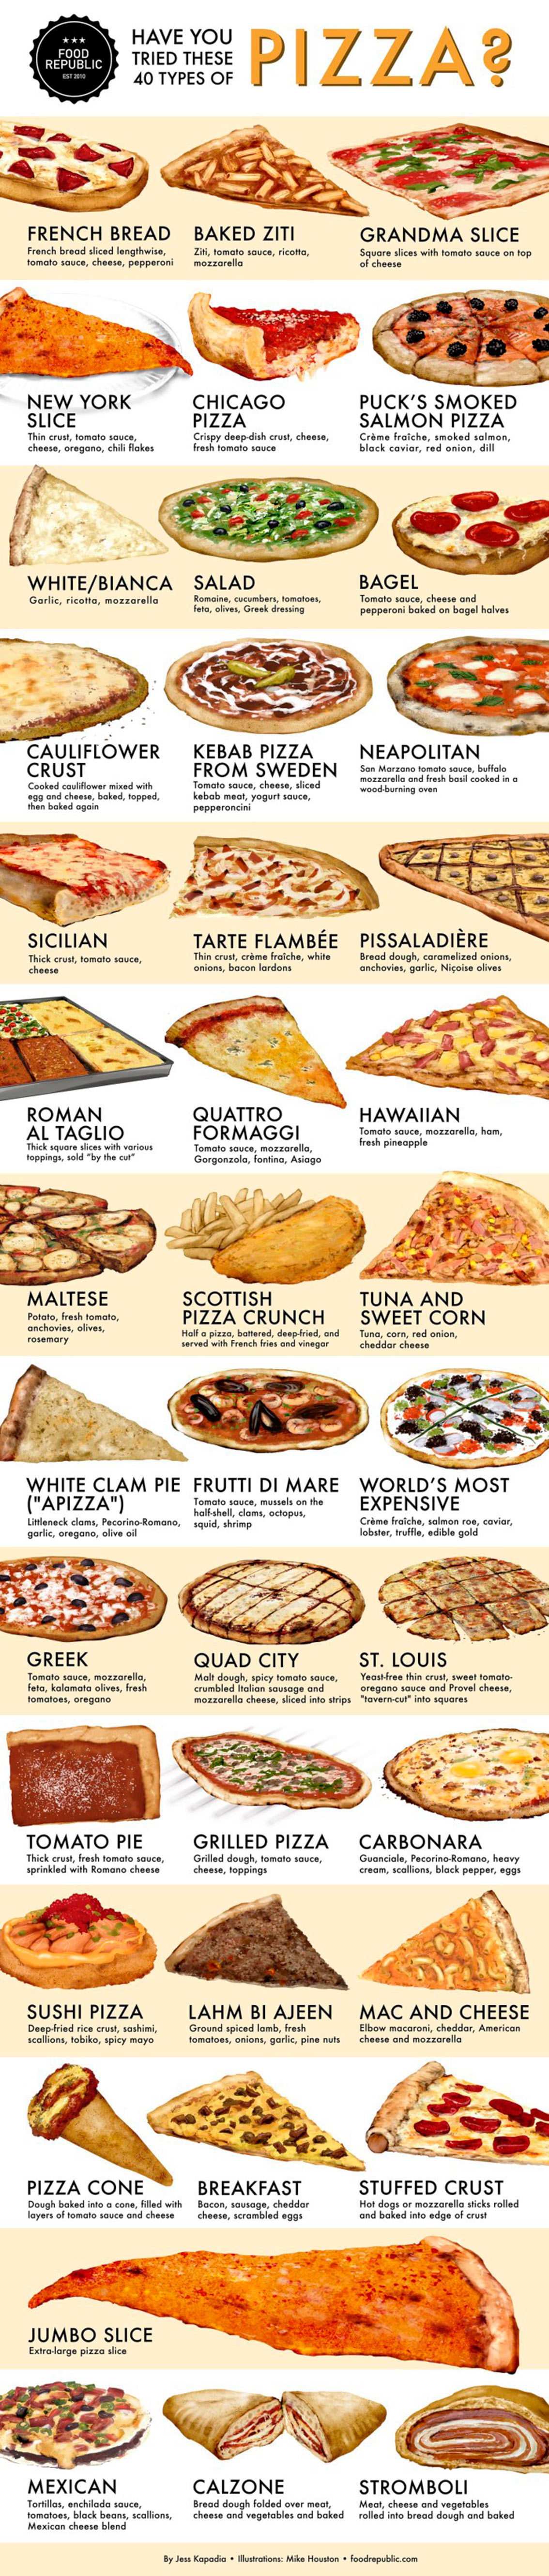 Types Of Pizza - Food Infographic